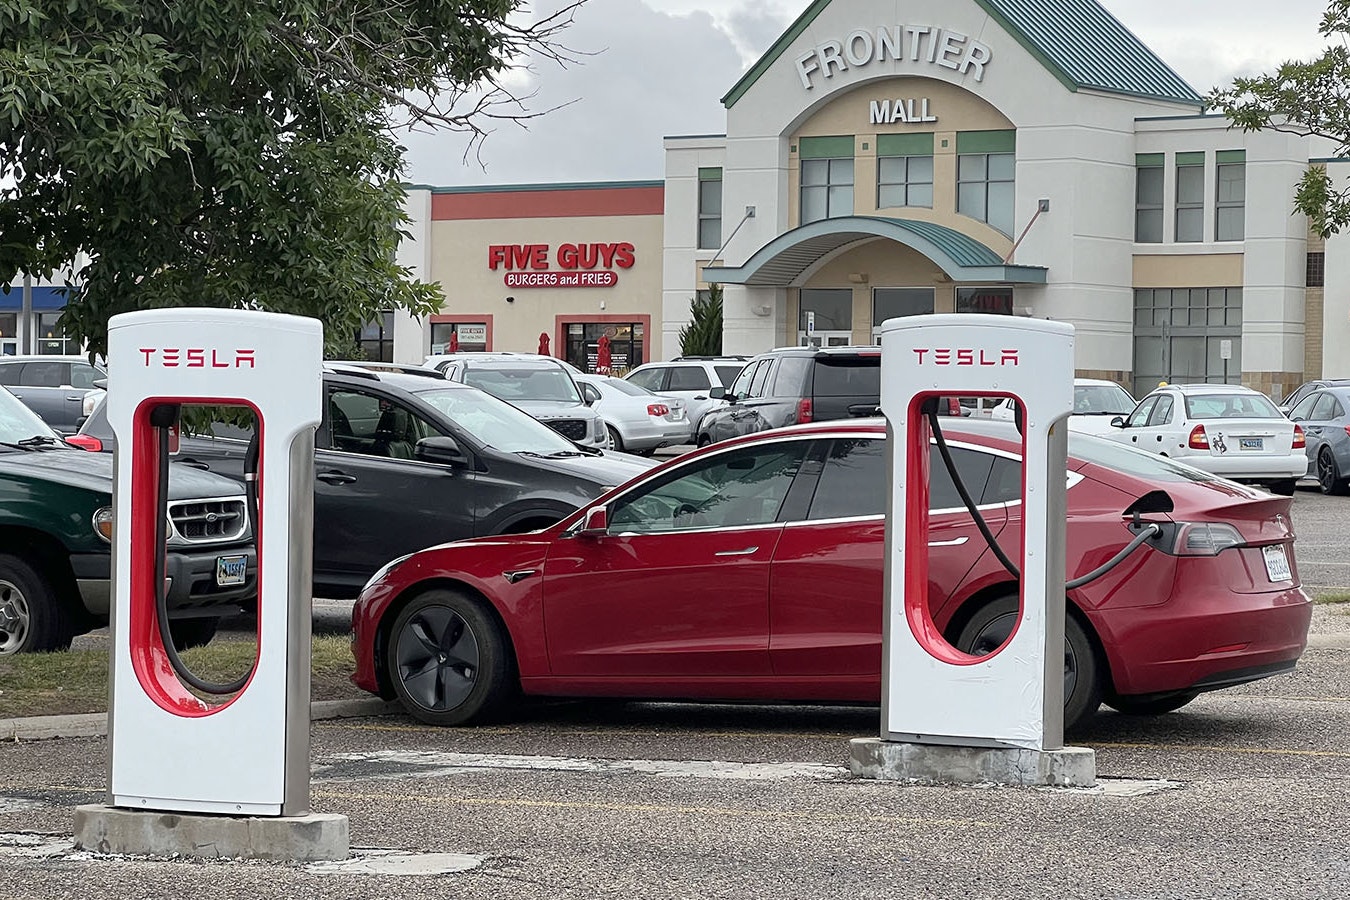 A Tesla juices up at a level 3 fast-charging station at the Frontier Mall in Cheyenne.